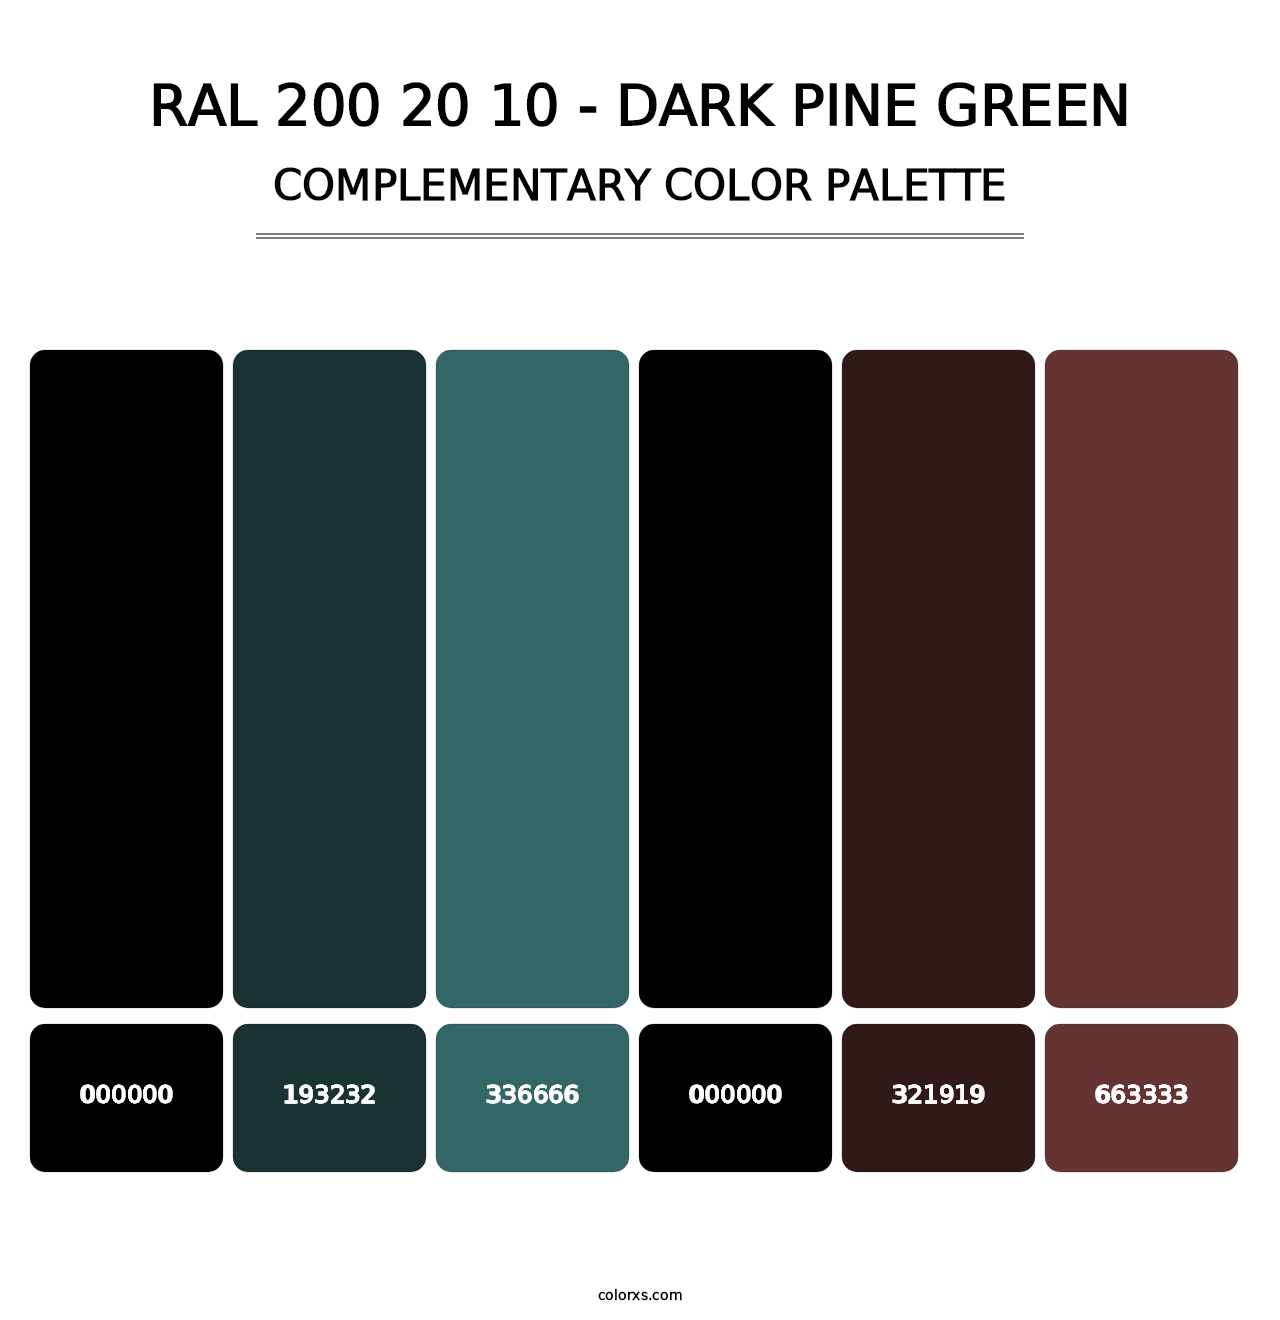 RAL 200 20 10 - Dark Pine Green - Complementary Color Palette